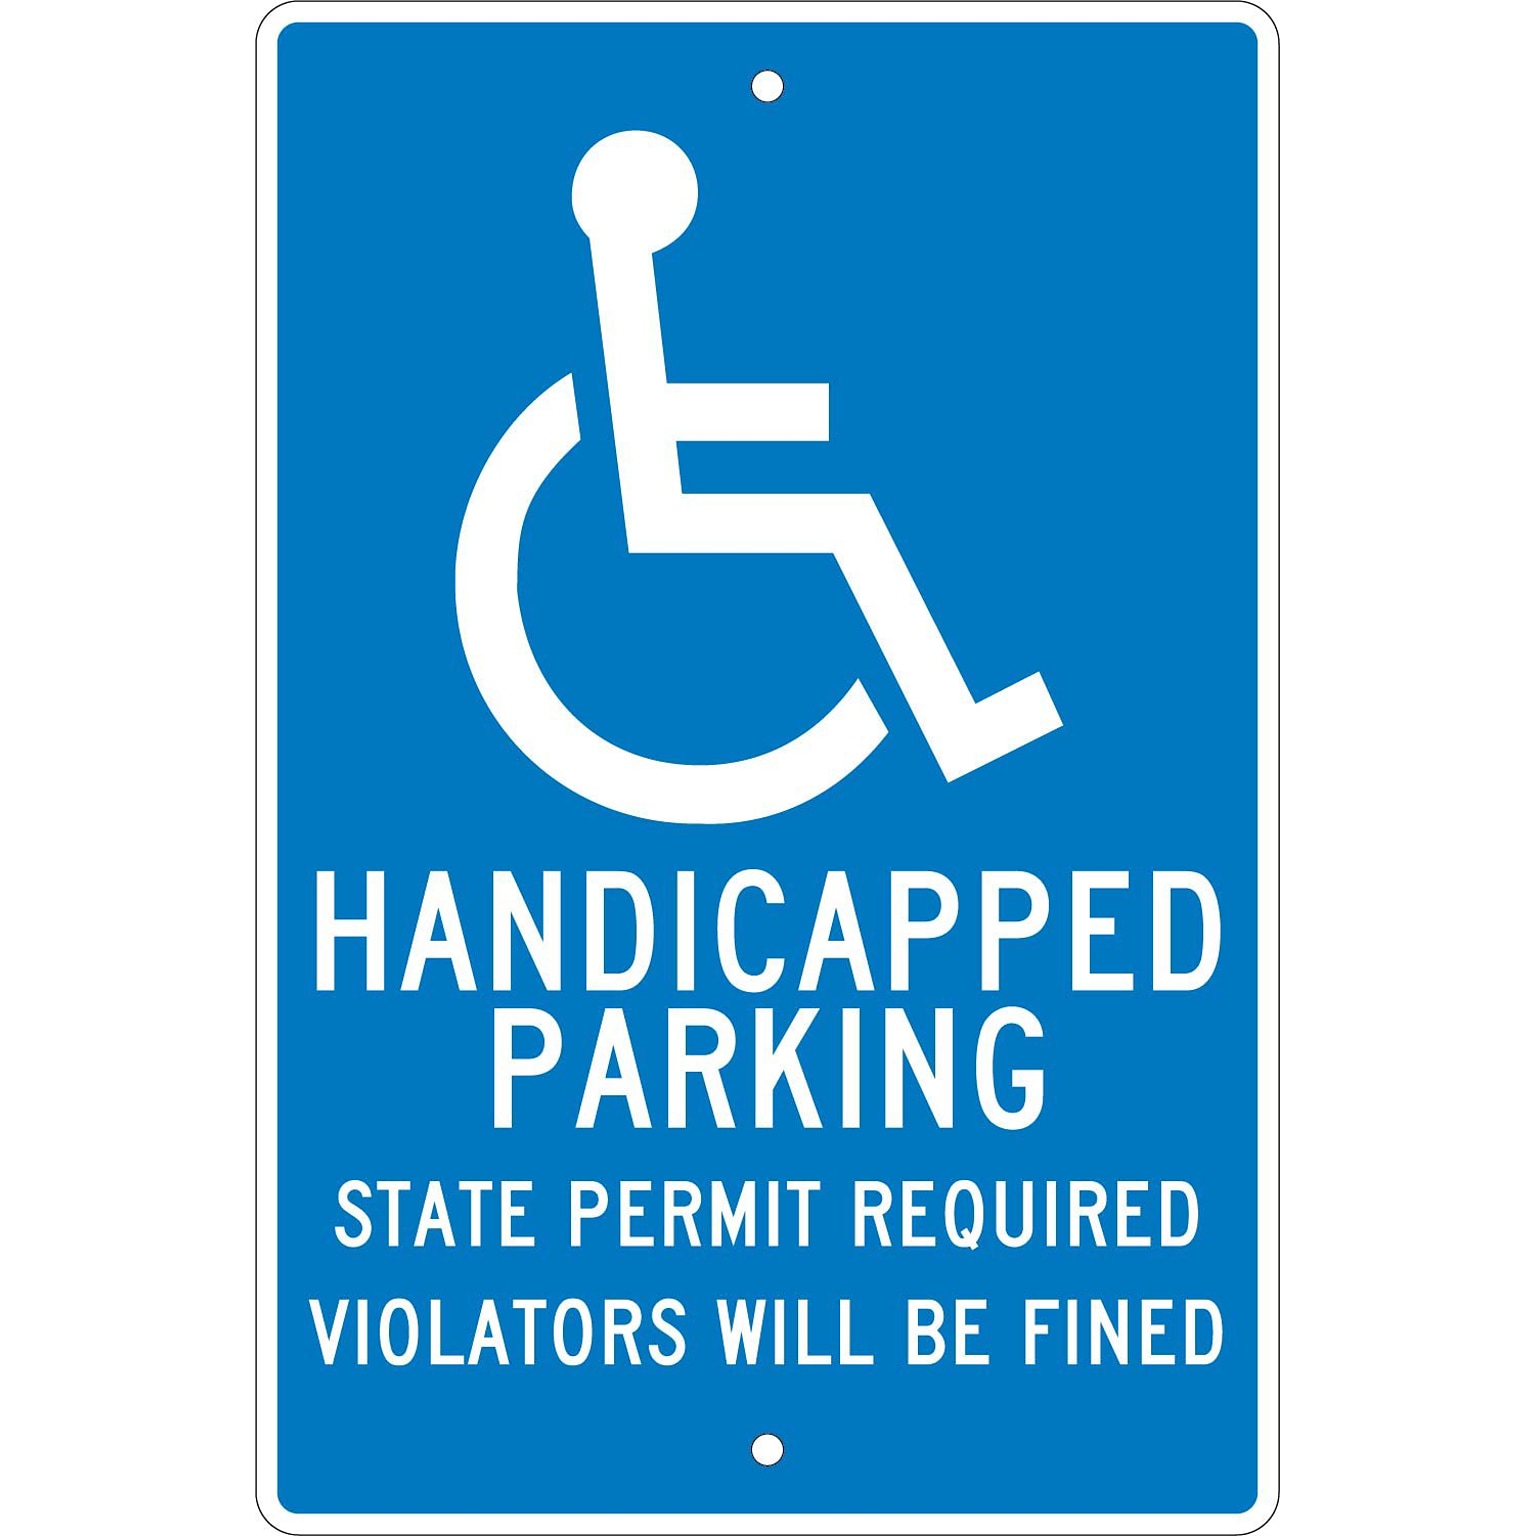 National Marker Handicapped Parking State Permit Required Violators Will Be Fined Parking Sign, 18 x 12, Aluminum (TM90H)